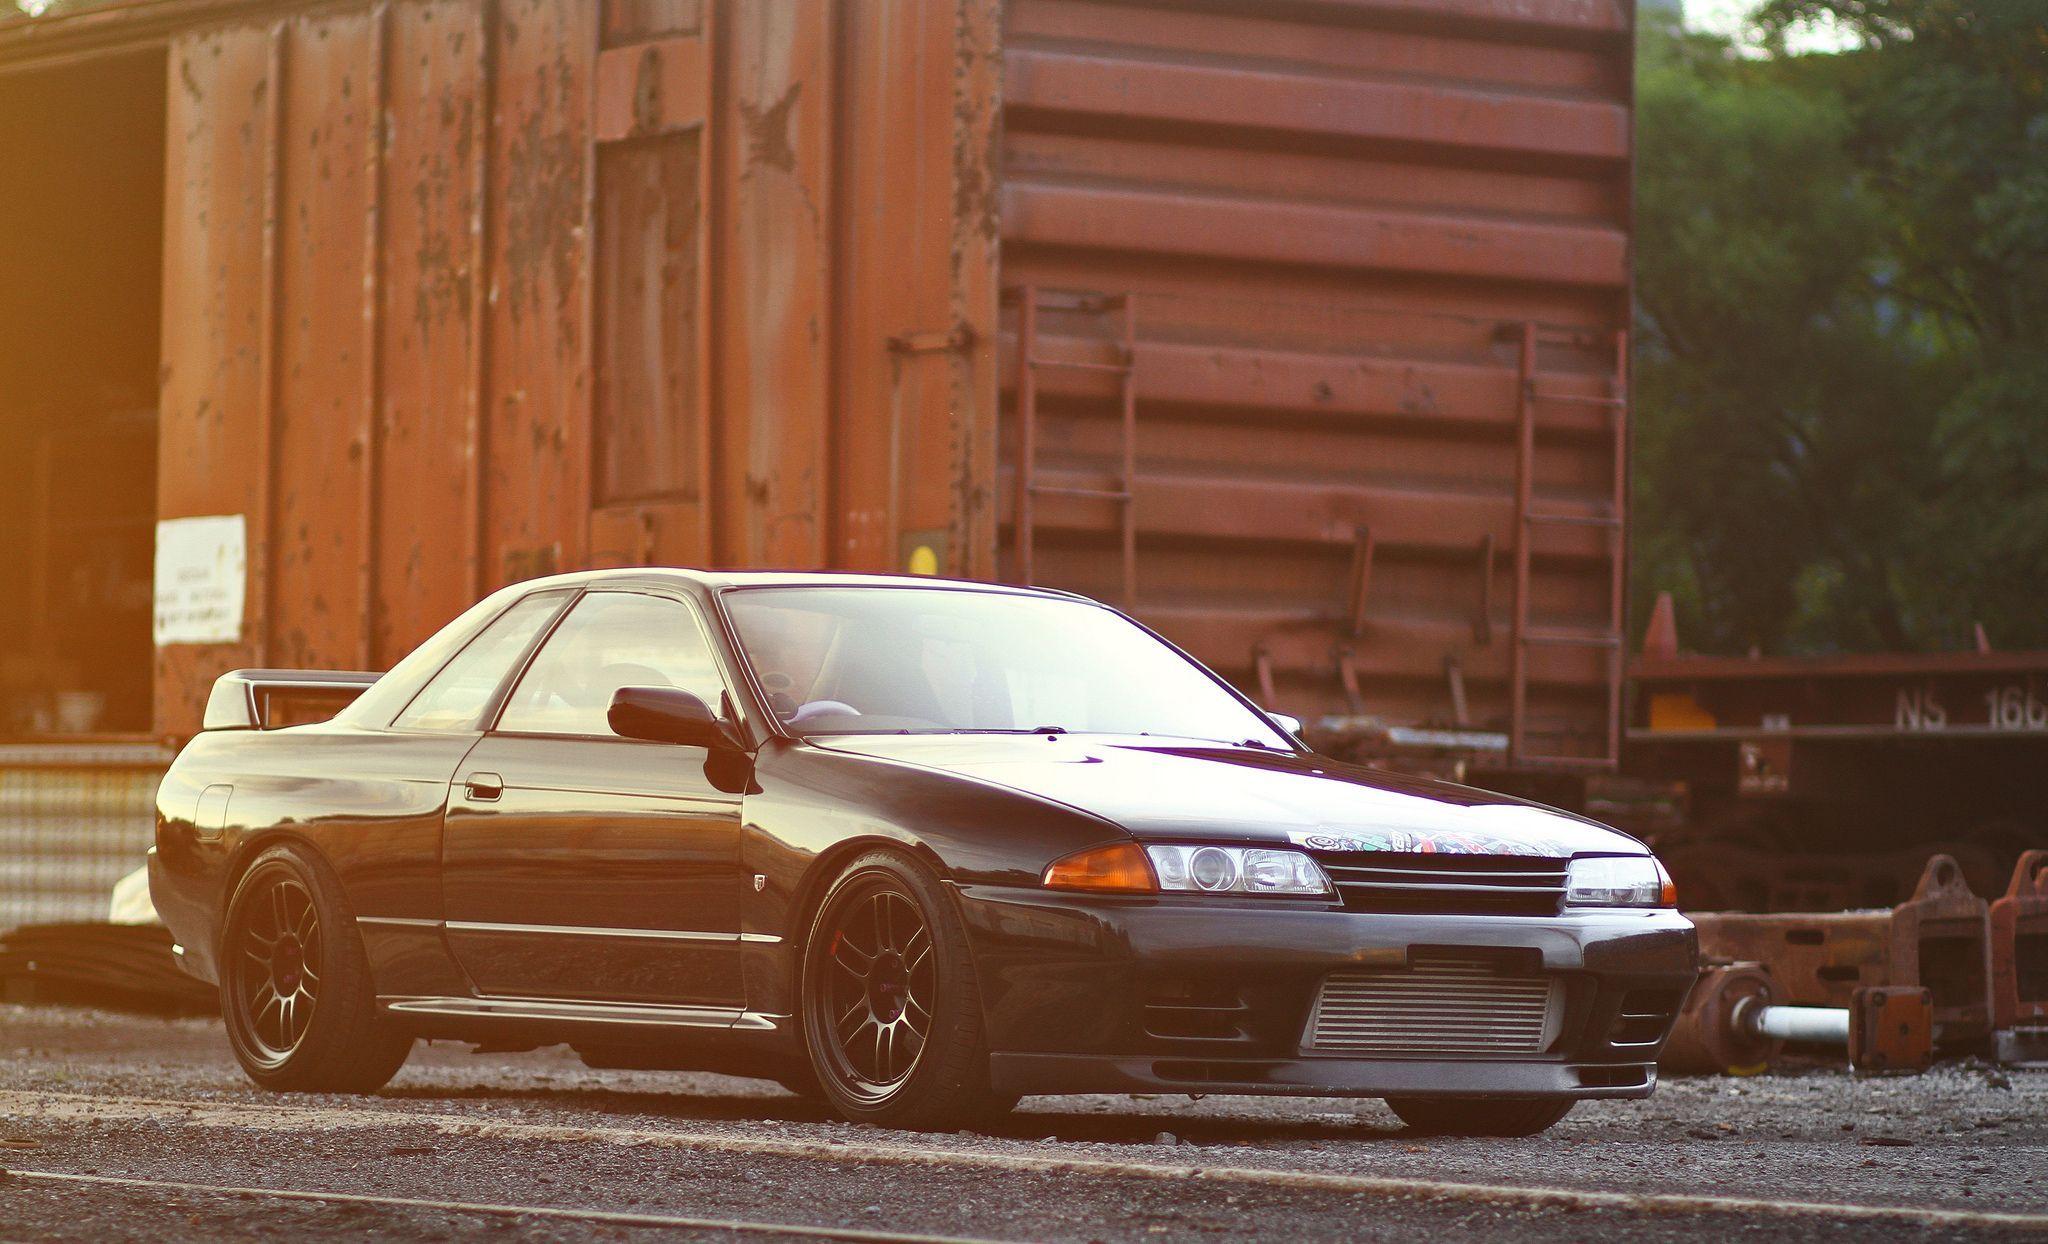 R32 Wallpapers Top Free R32 Backgrounds Wallpaperaccess